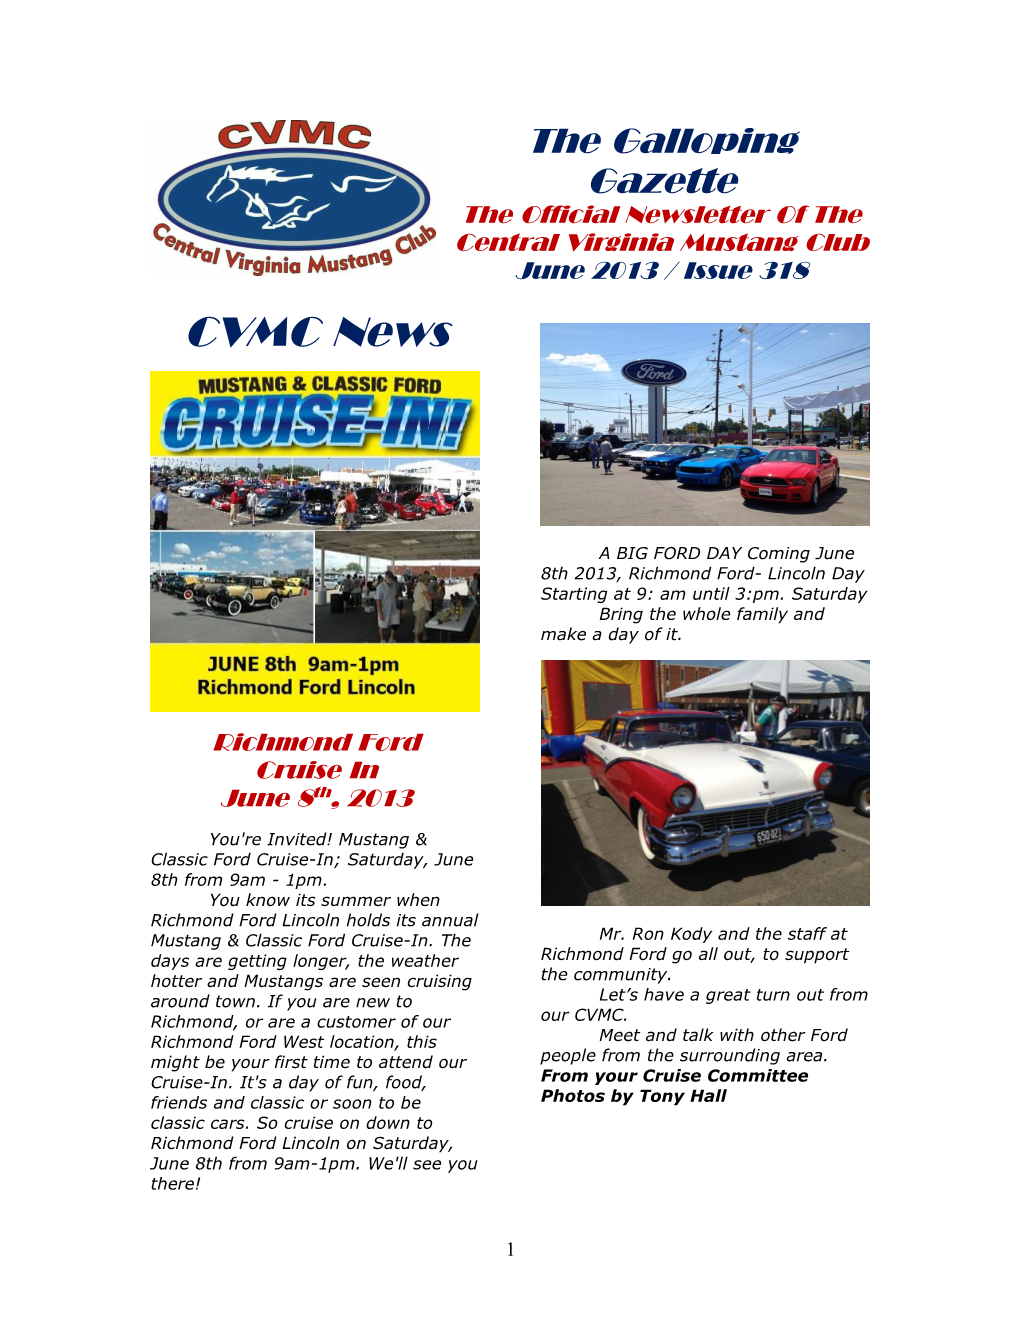 The Galloping Gazette the Official Newsletter of the Central Virginia Mustang Club June 2013 / Issue 318